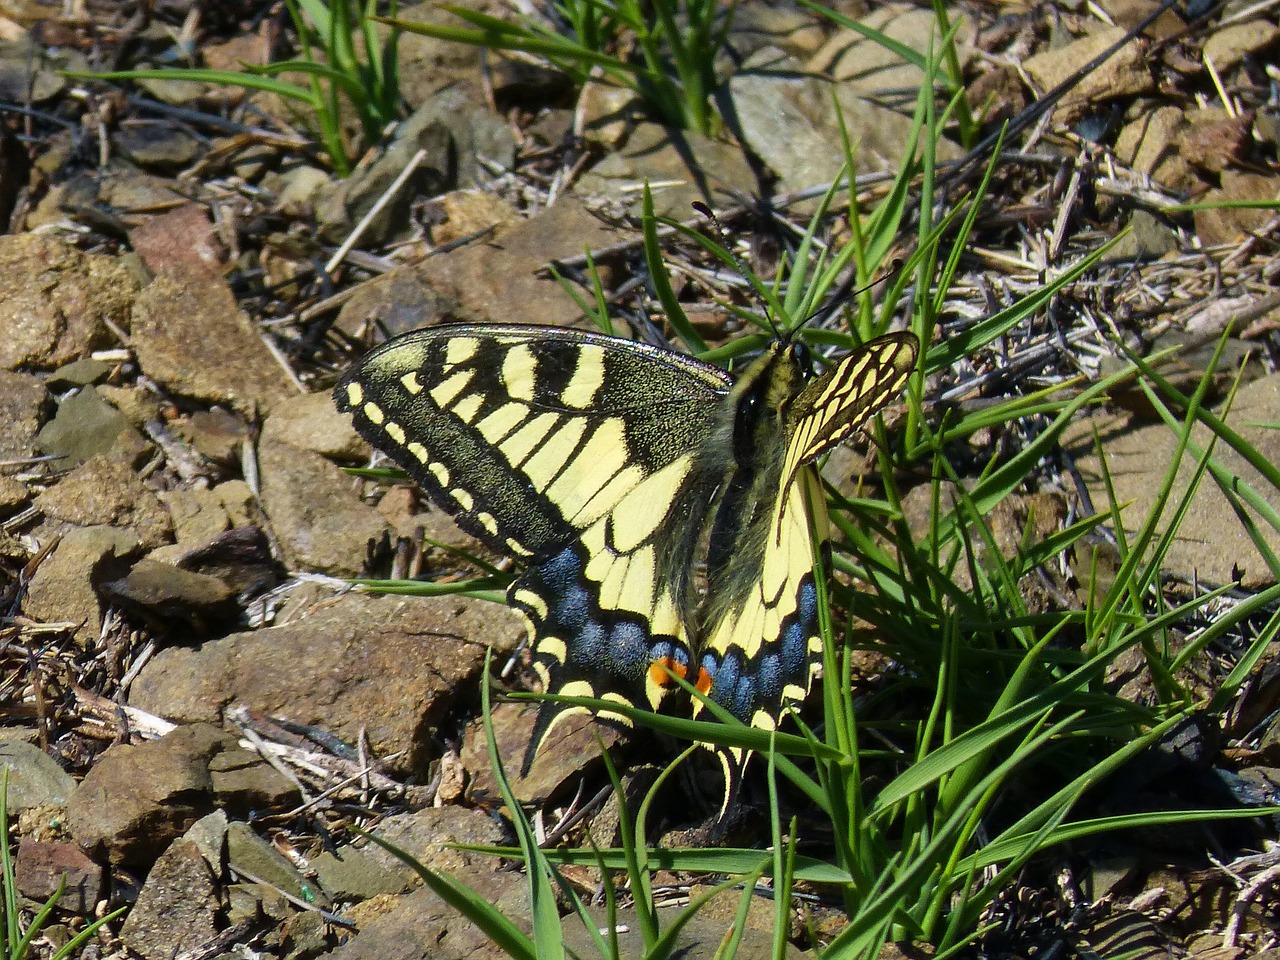 papilio machaon machaon butterfly queen free photo